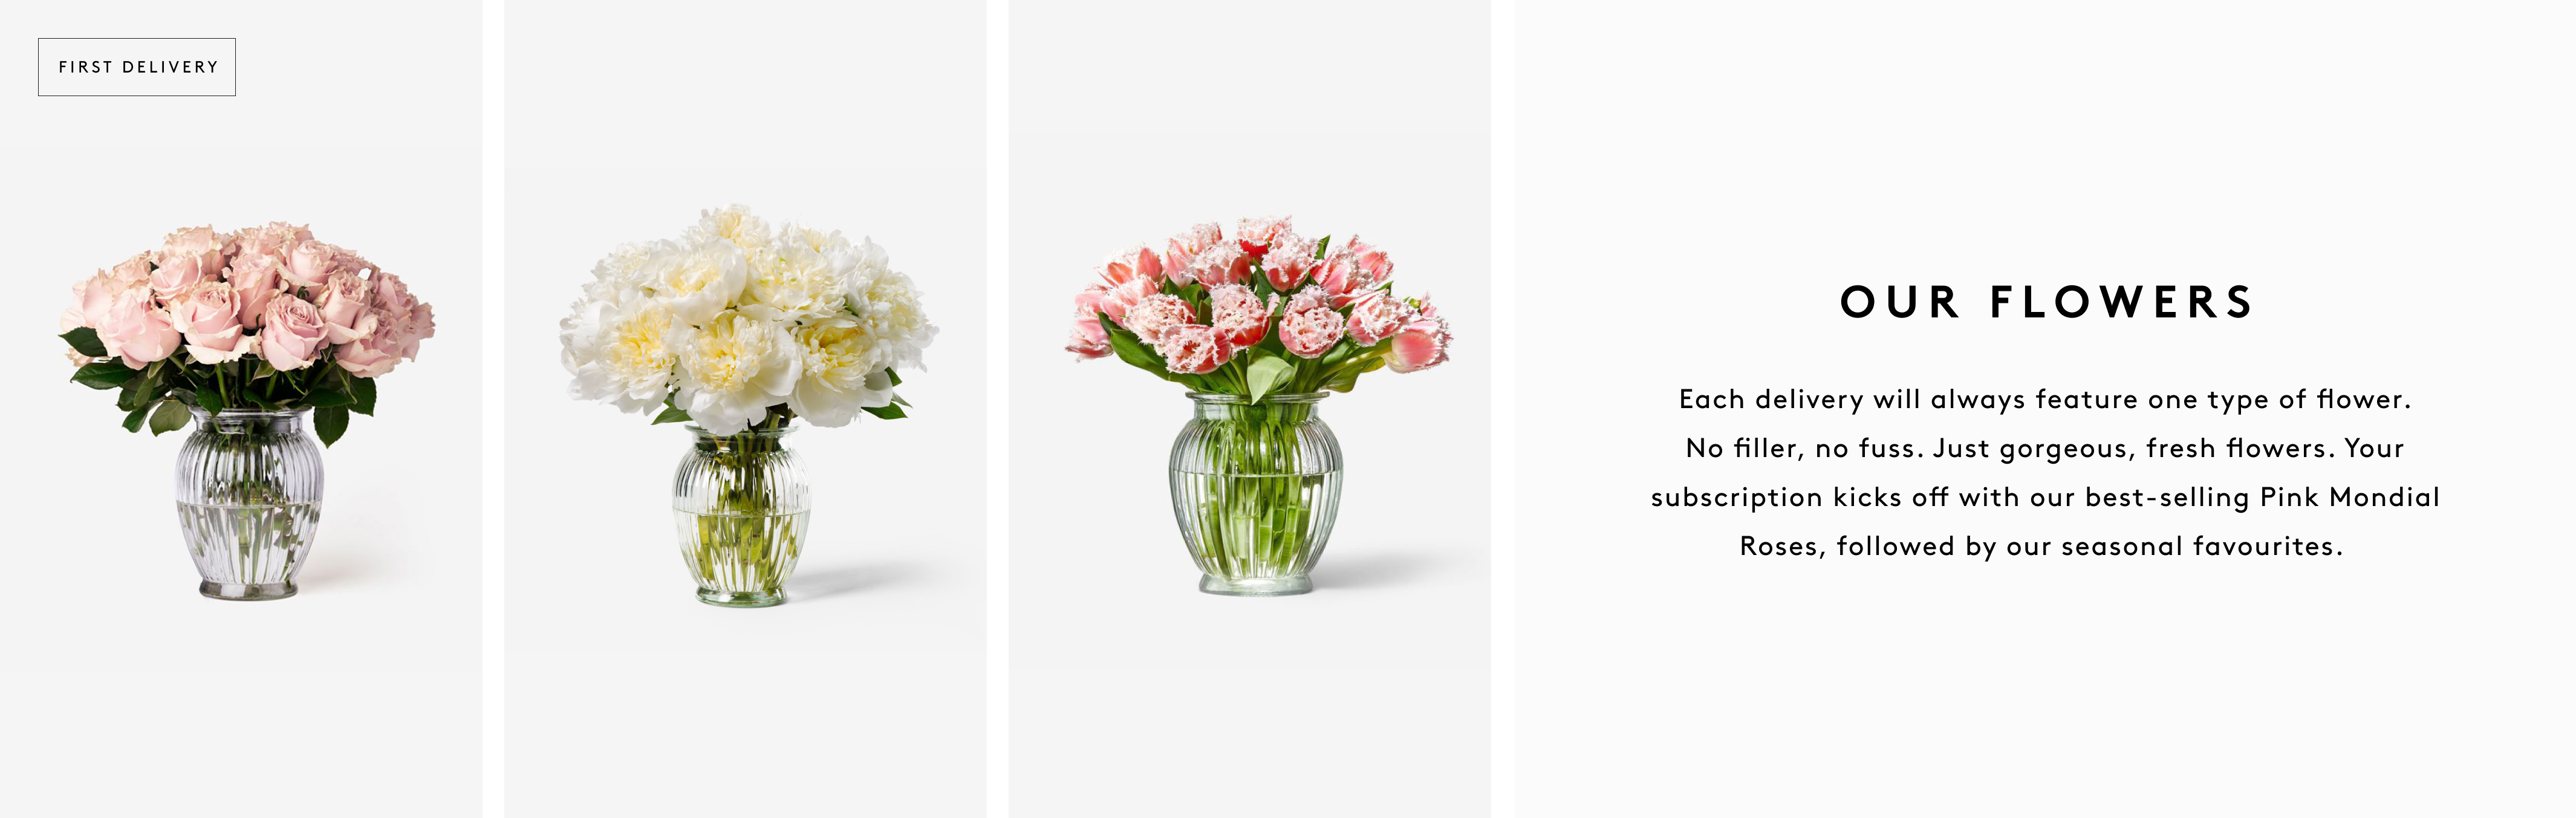 the flowers you'll get with your subscription